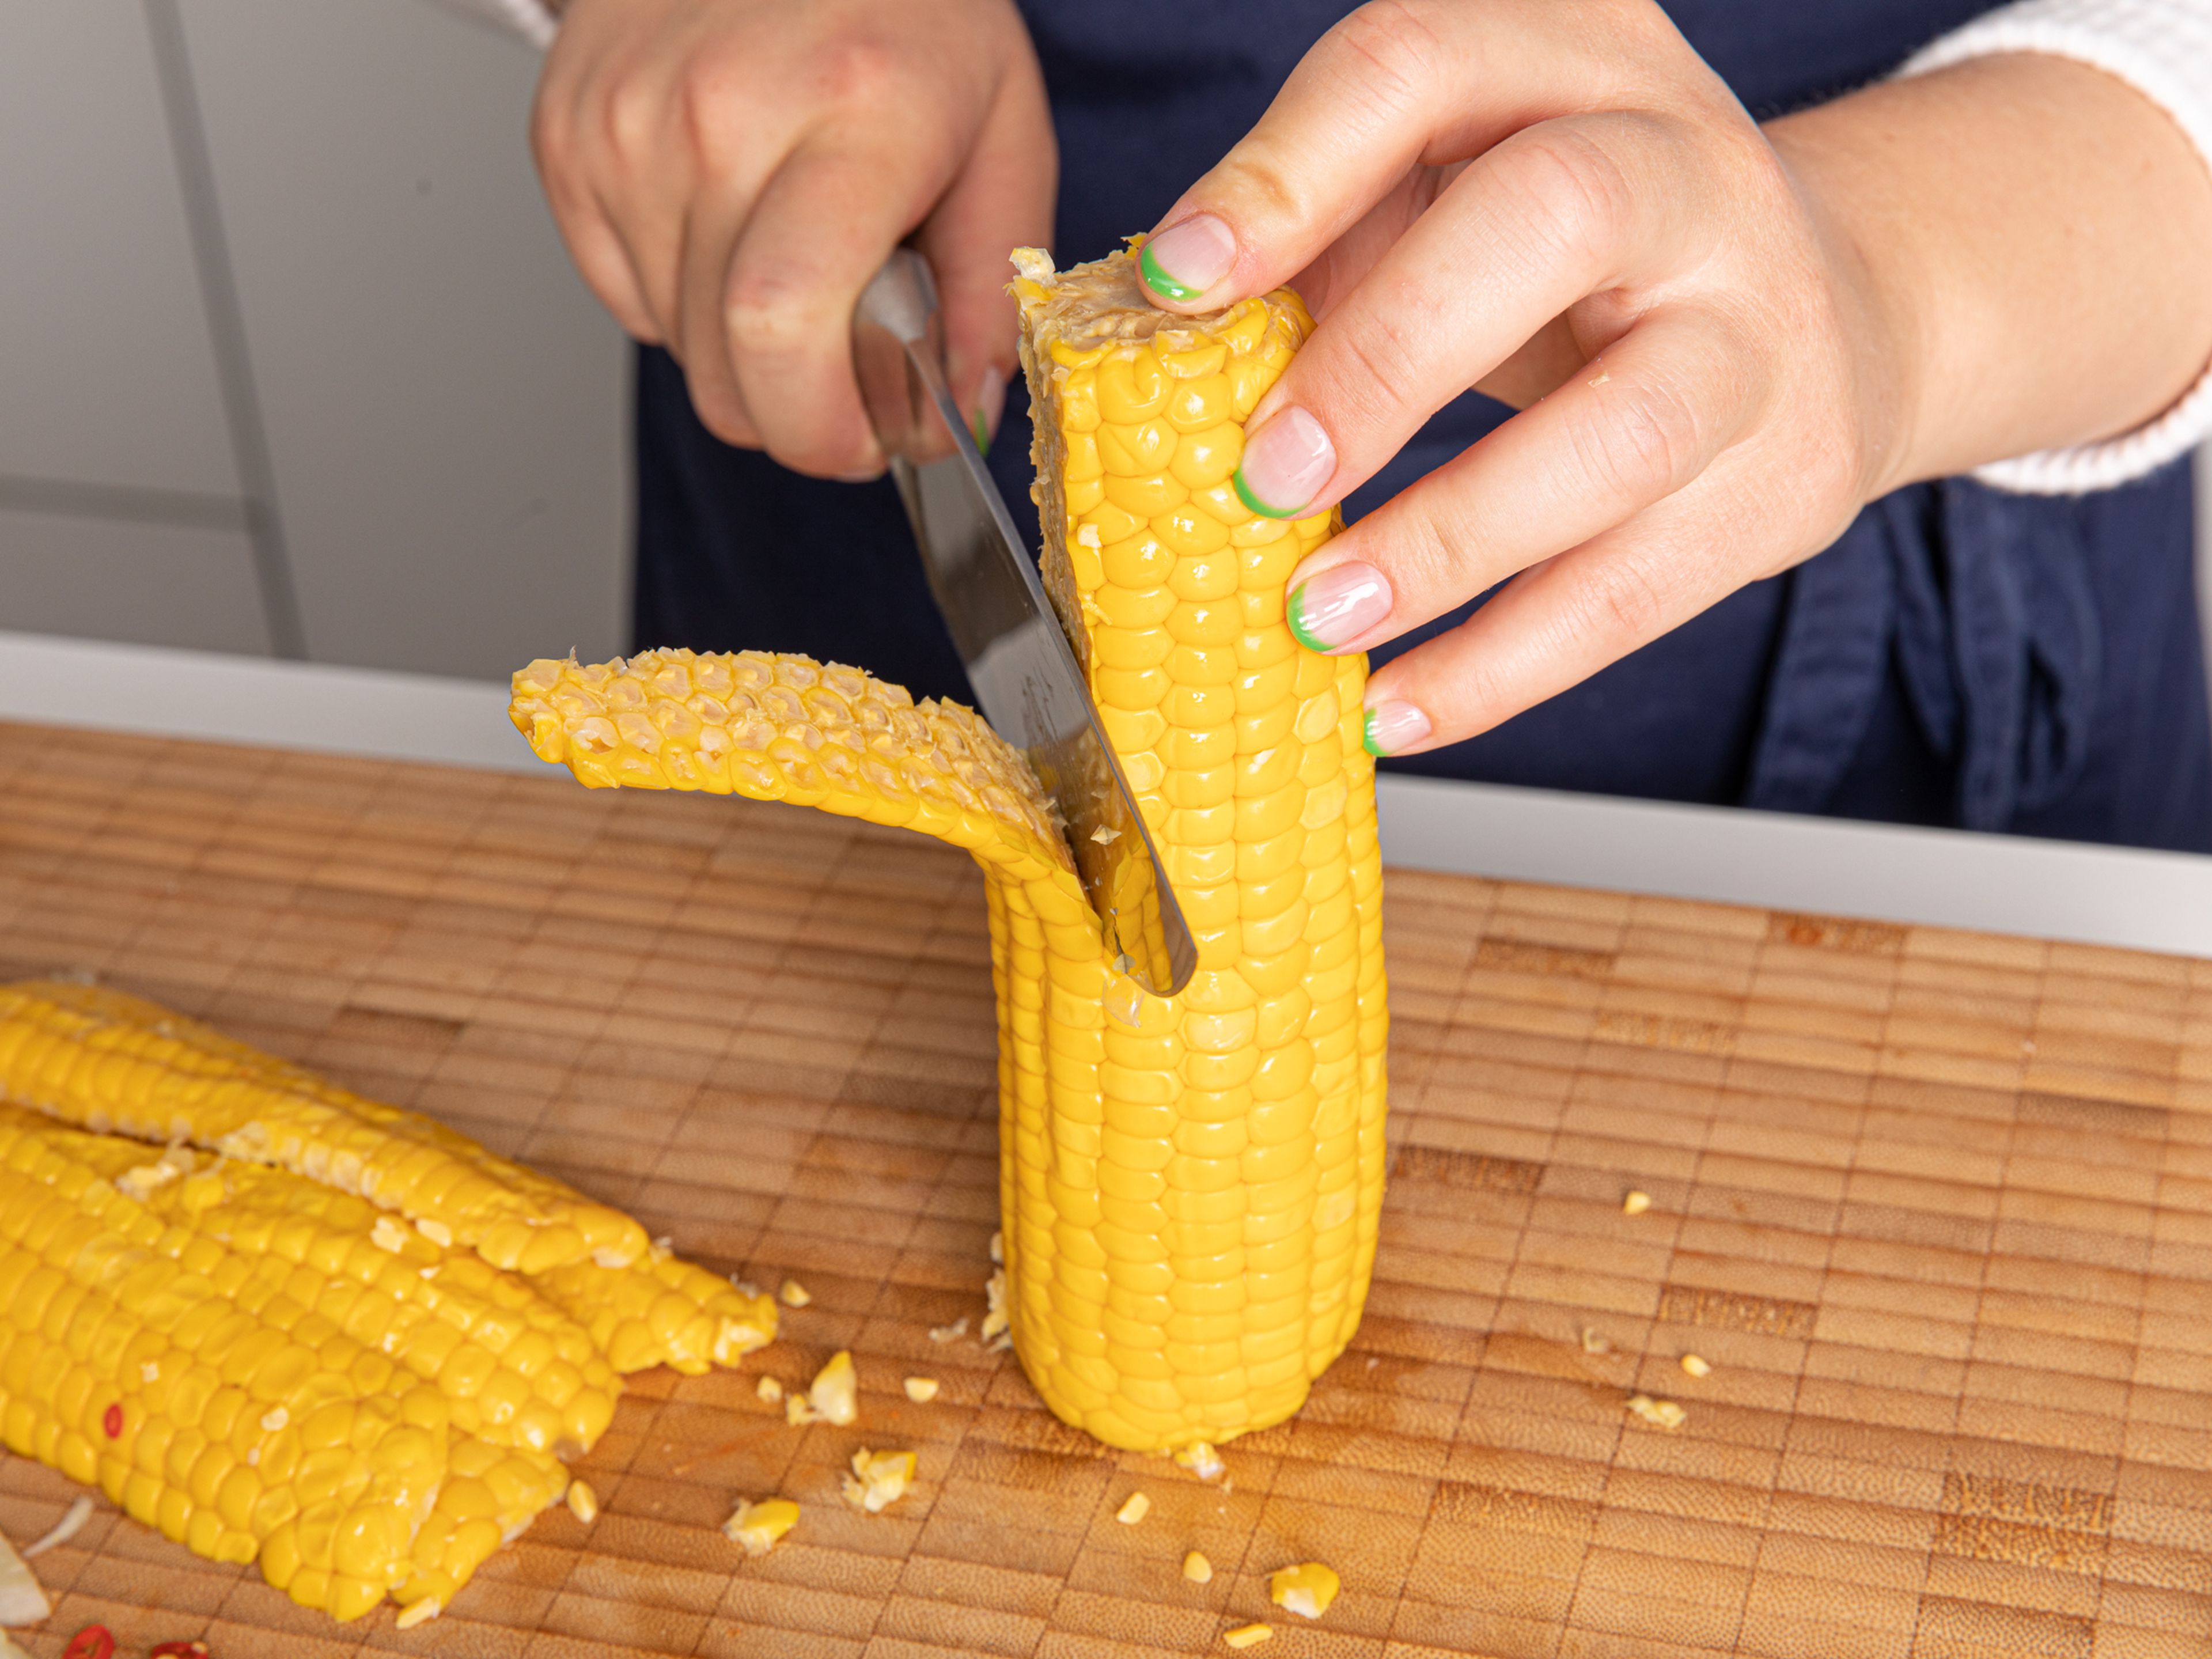 Peel onion, halve, and slice. Peel and slice garlic. Slice scallion. Place the corn cobs upright onto a cutting board and carefully use a knife to slice the kernels straight down off the cob. Thinly slice chili.